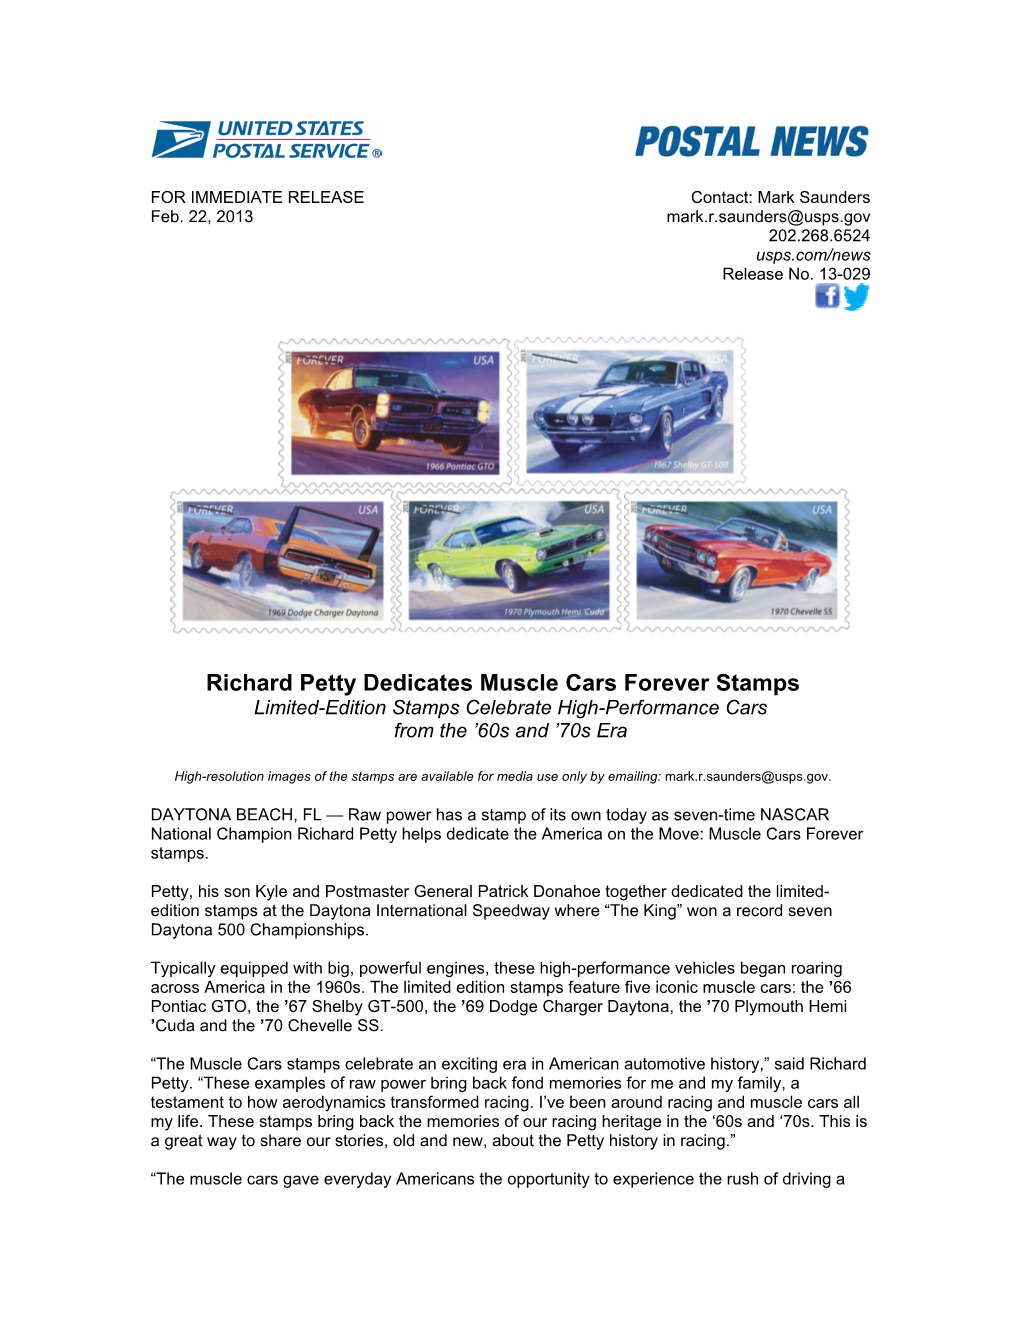 Richard Petty Dedicates Muscle Cars Forever Stamps Limited-Edition Stamps Celebrate High-Performance Cars from the ’60S and ’70S Era